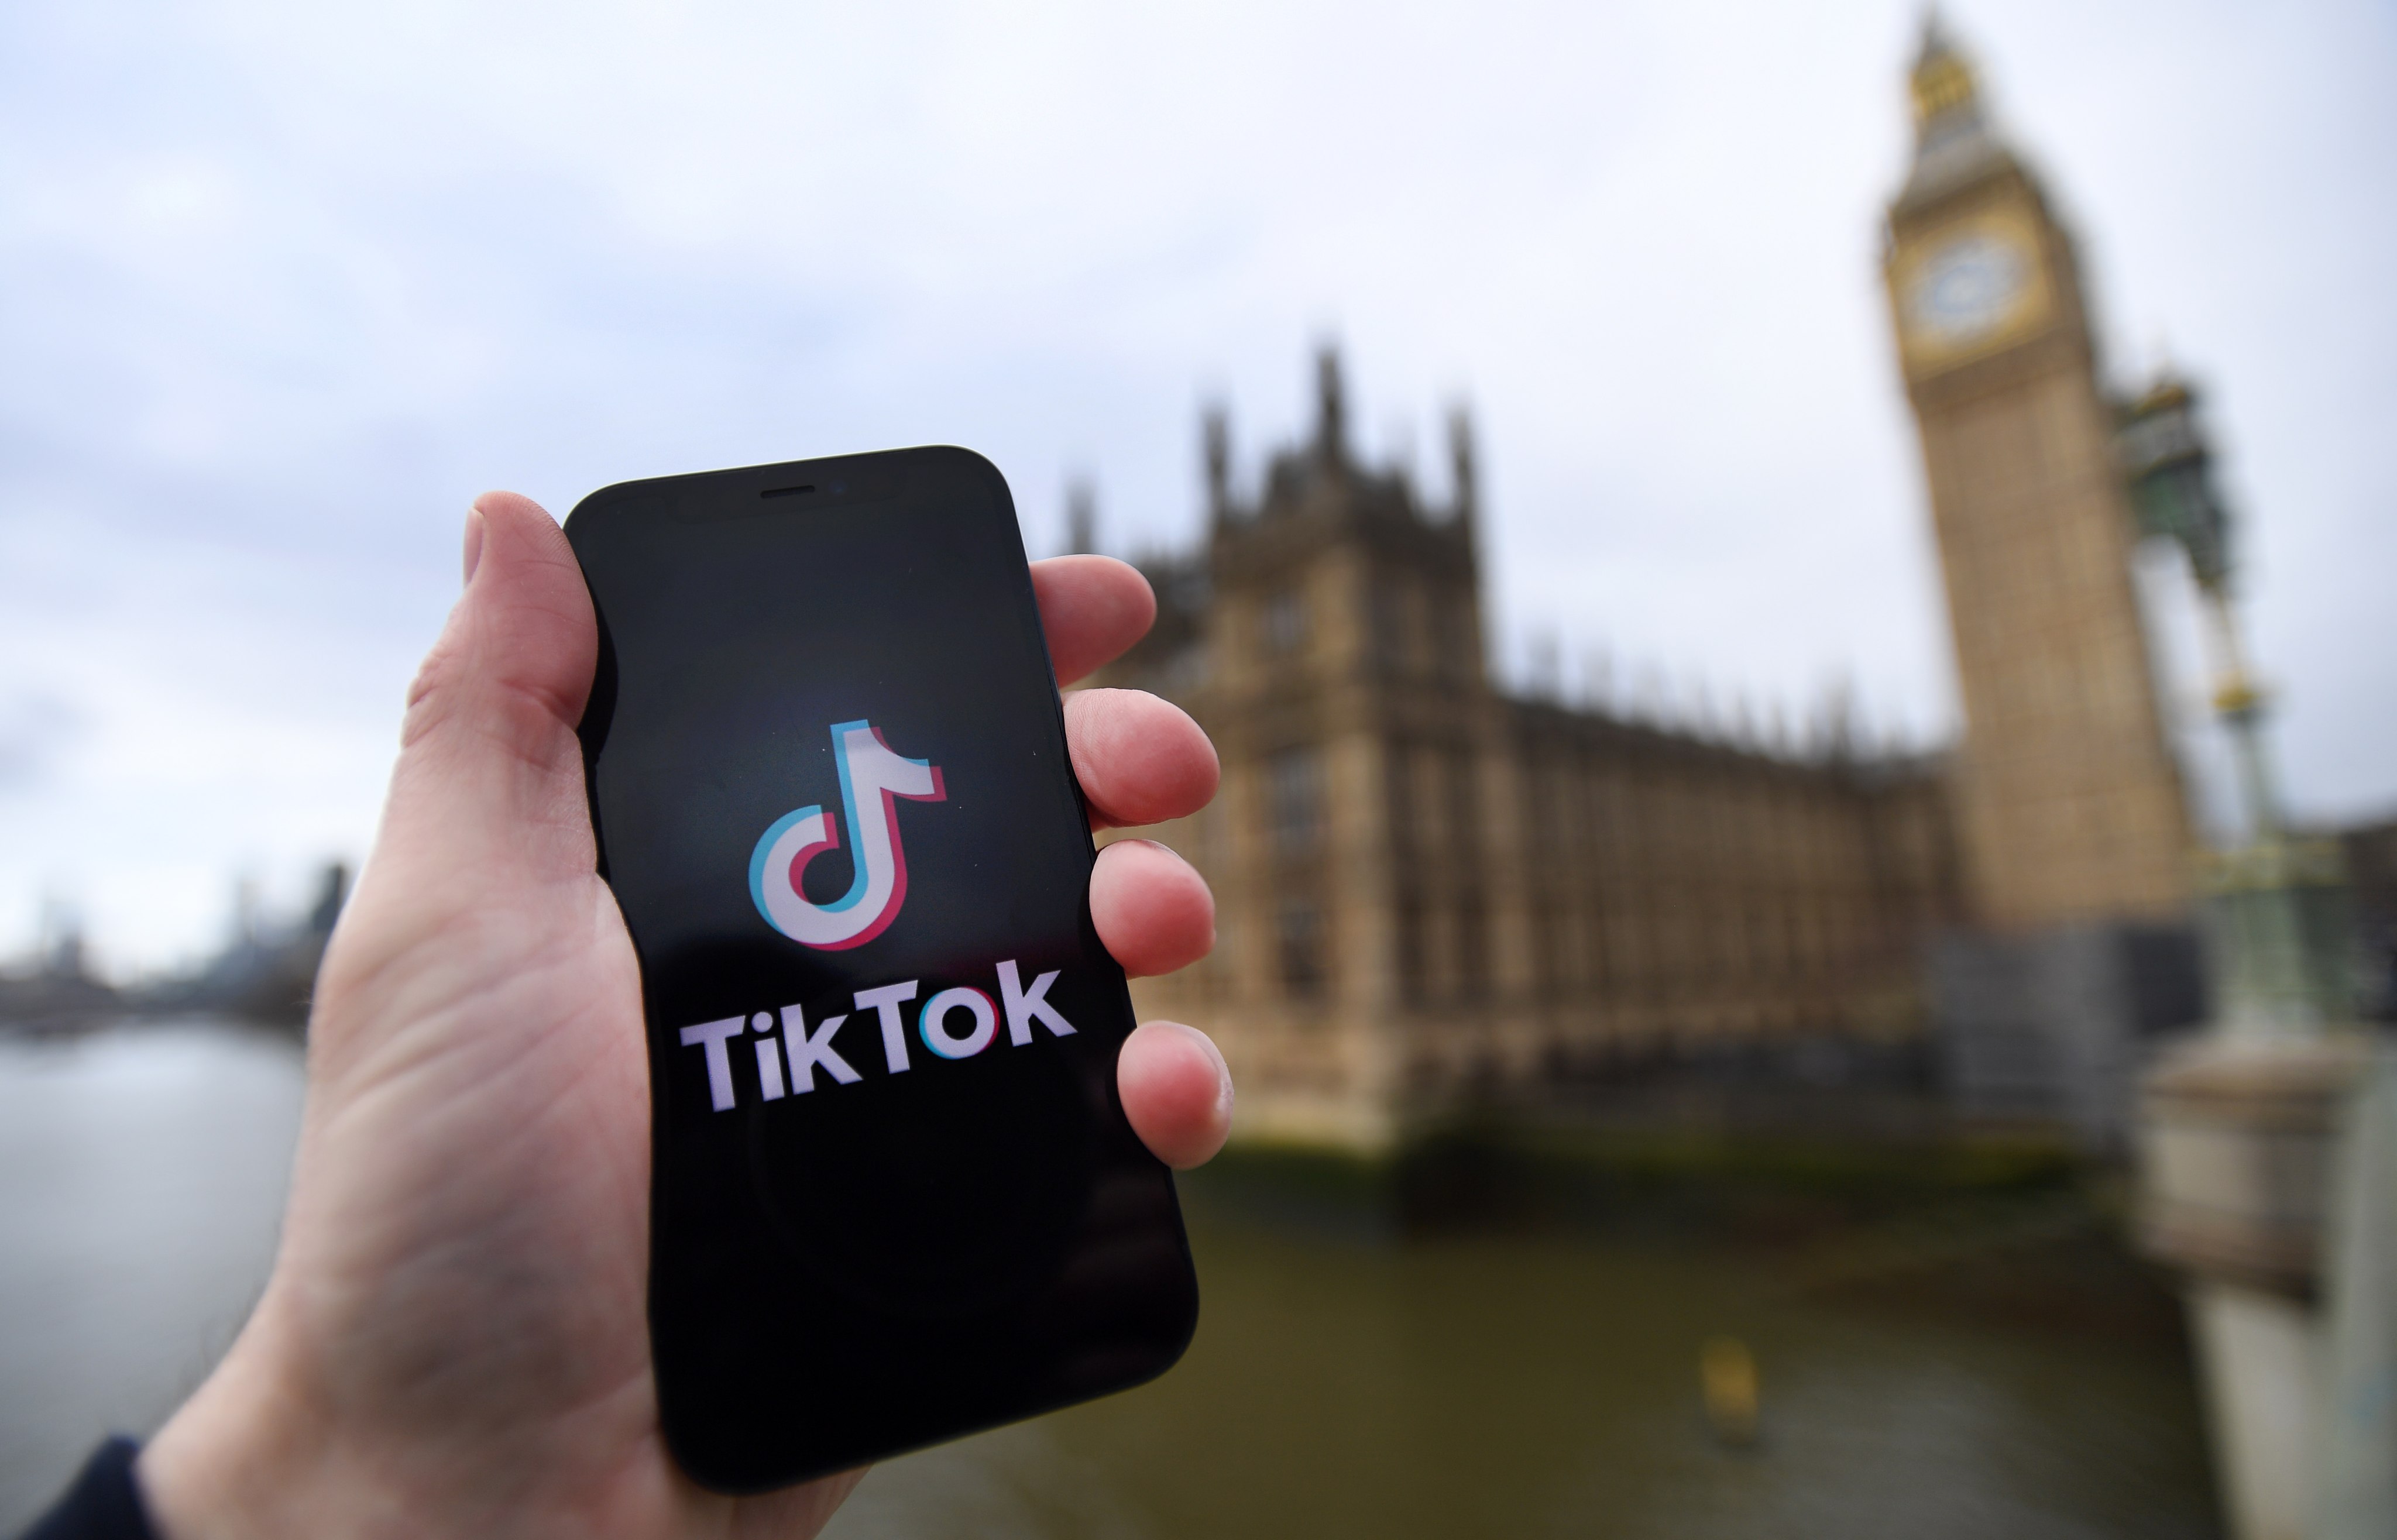 Tik Tok’s logo on a smartphone in front of the British parliament in London. Photo:  EPA-EFE